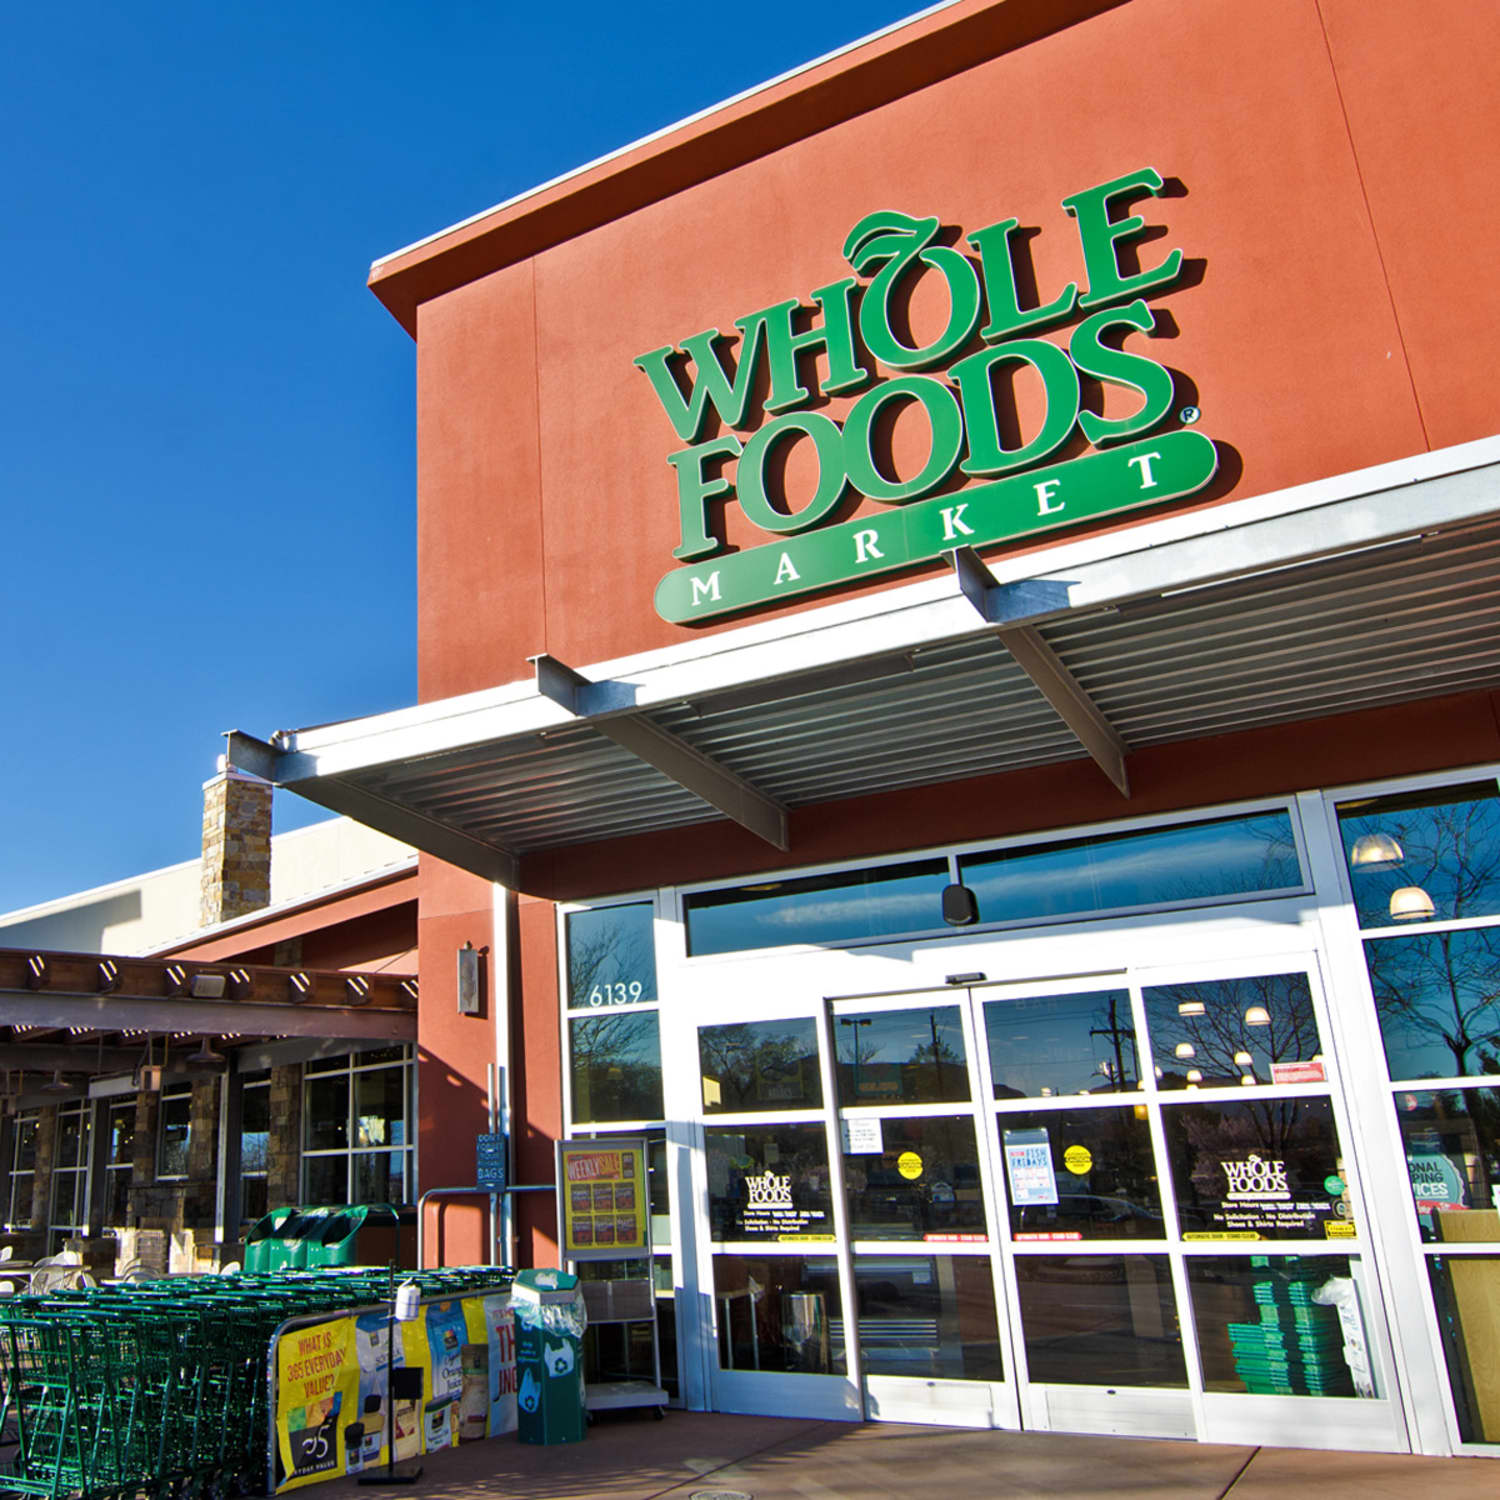 Healthy Whole Foods Grocery List